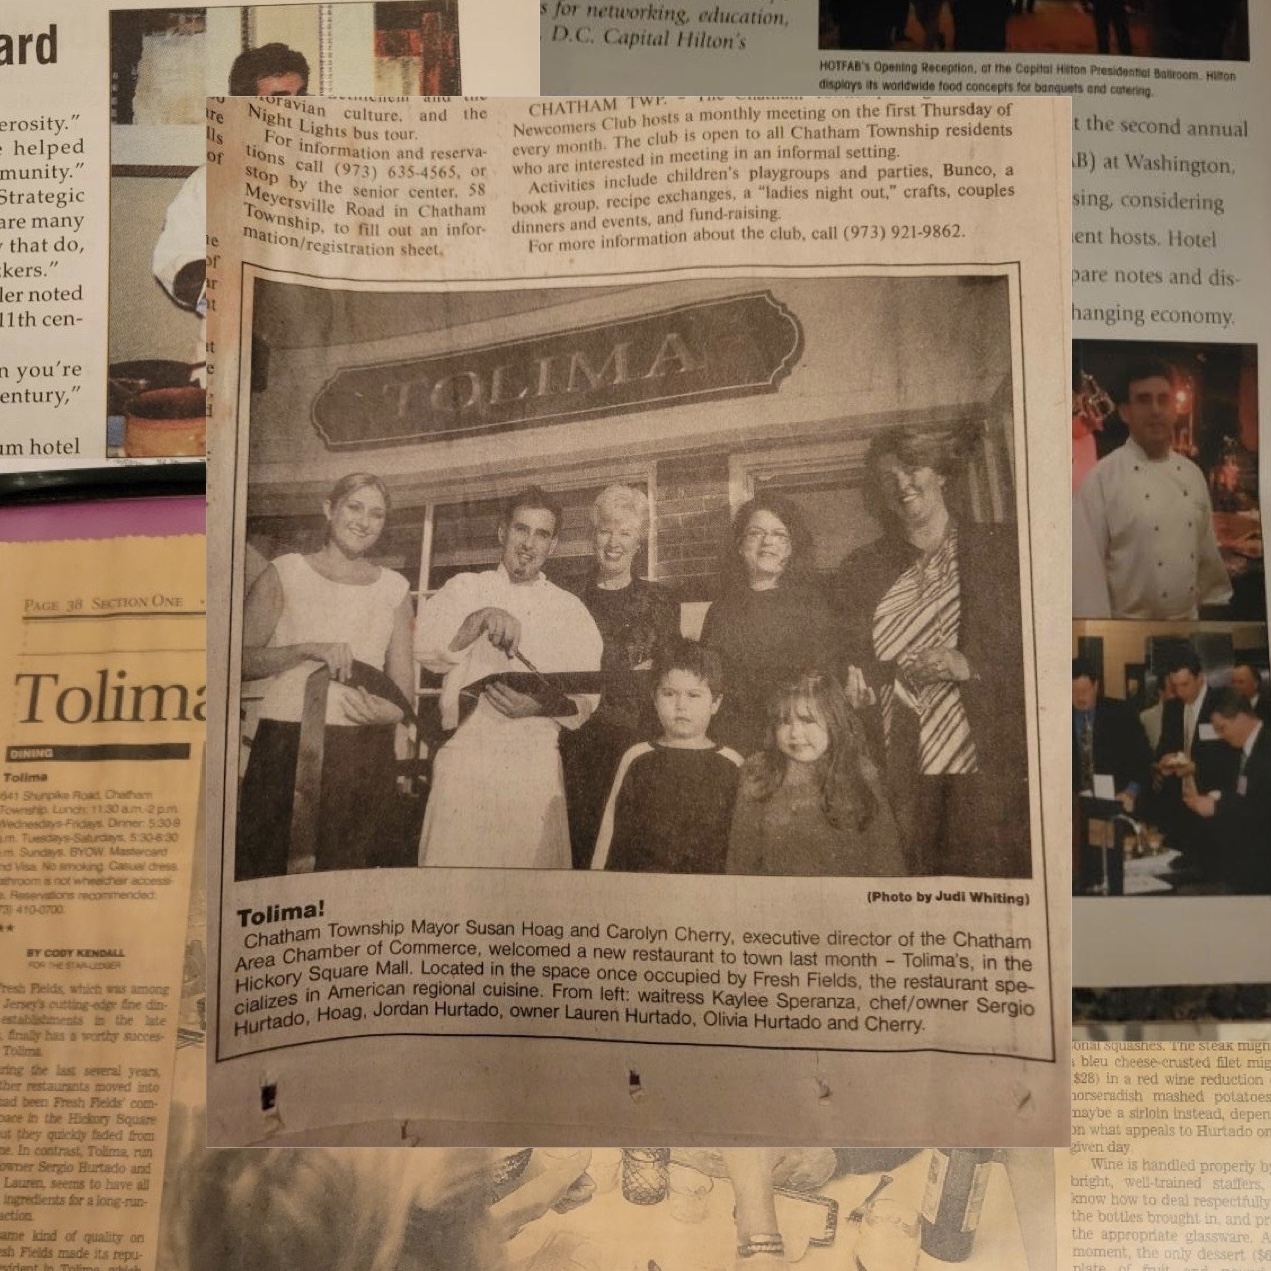 A collage of newspaper and magazine clippings featuring my father. In the front and center of the collage is a newspaper clipping with a black-and-white photograph in which the Hurtado family stands together with community members and smiles on the opening day of their restaurant.